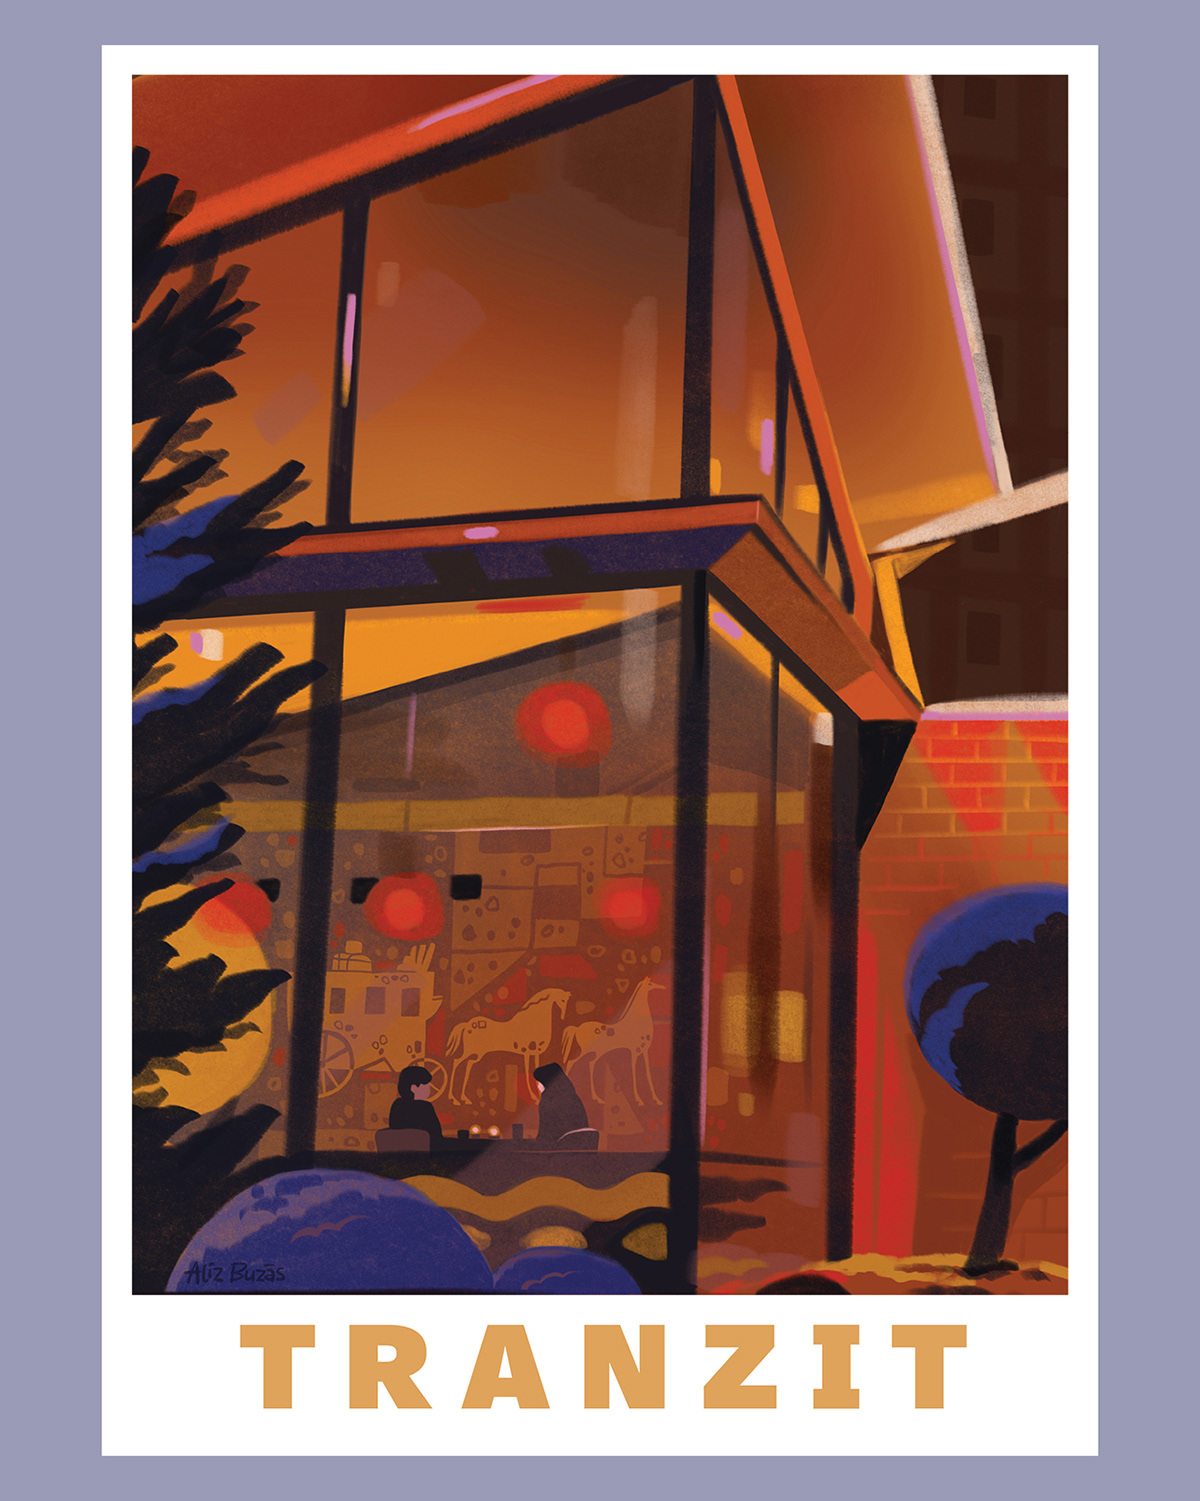 budapest Coffee COVid helping pandemic people poster restaurant support architecture